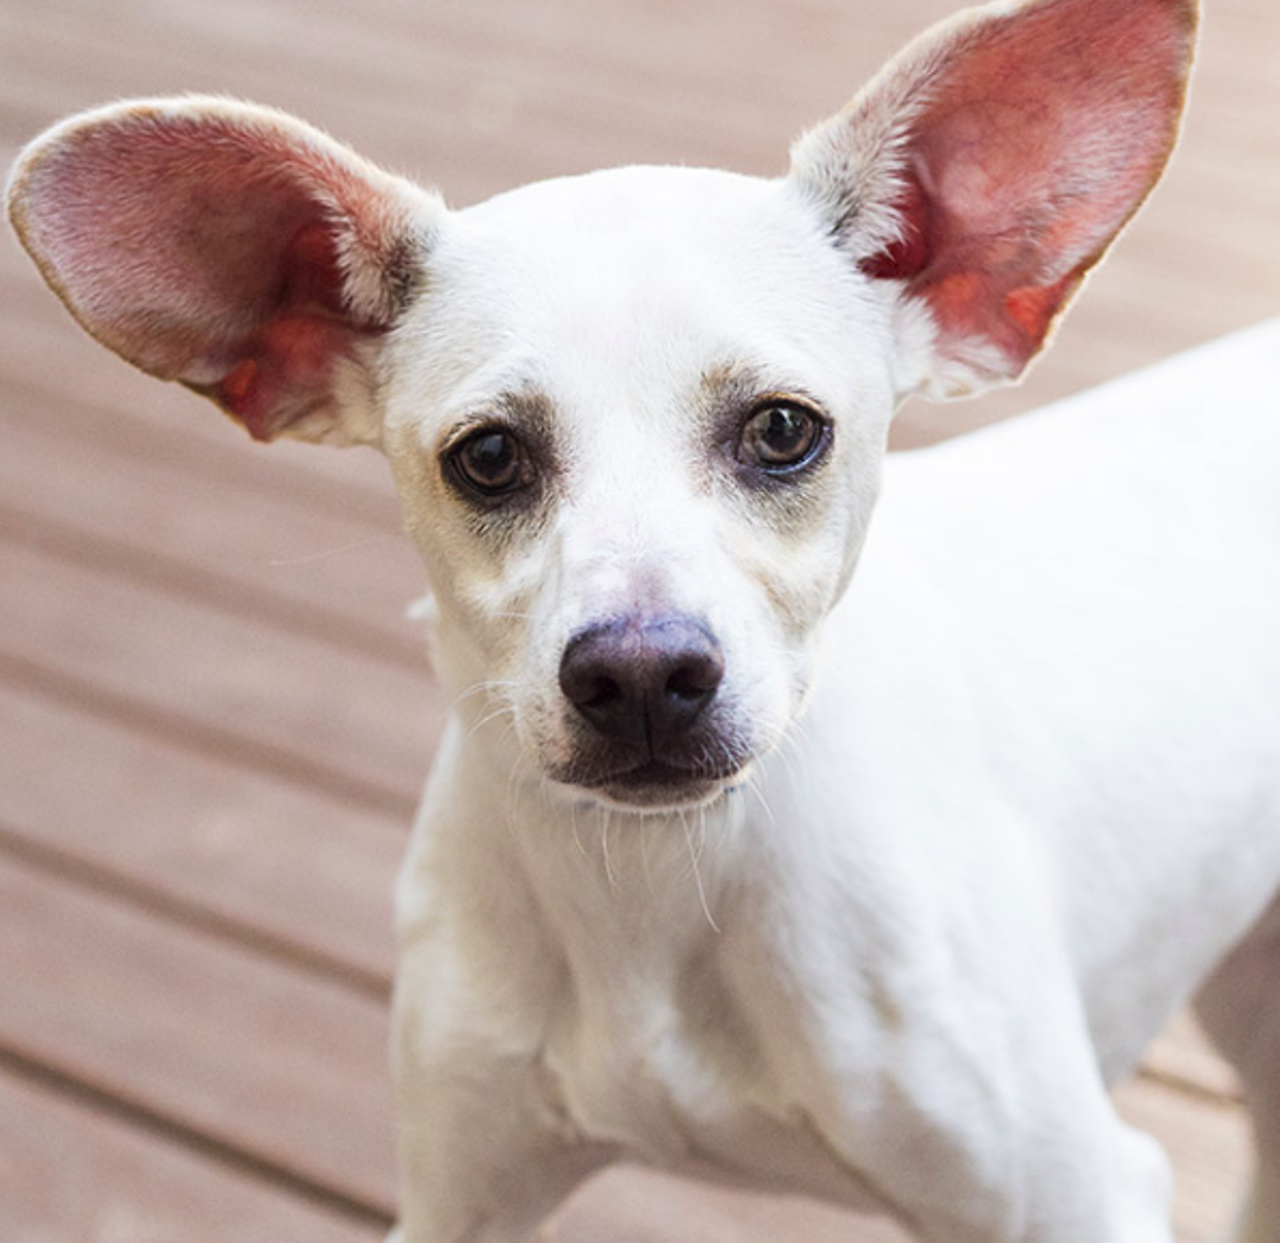 Herby
"Hi there! My name is Herby the Love Bug! Go ahead and tell me how much you love me, I’m all ears! They’re pretty big but I think it makes me look adorable! Don’t you think so too? I’m a charming, playful, goofy, and super curious little guy! I would love to go on adventures with you!"